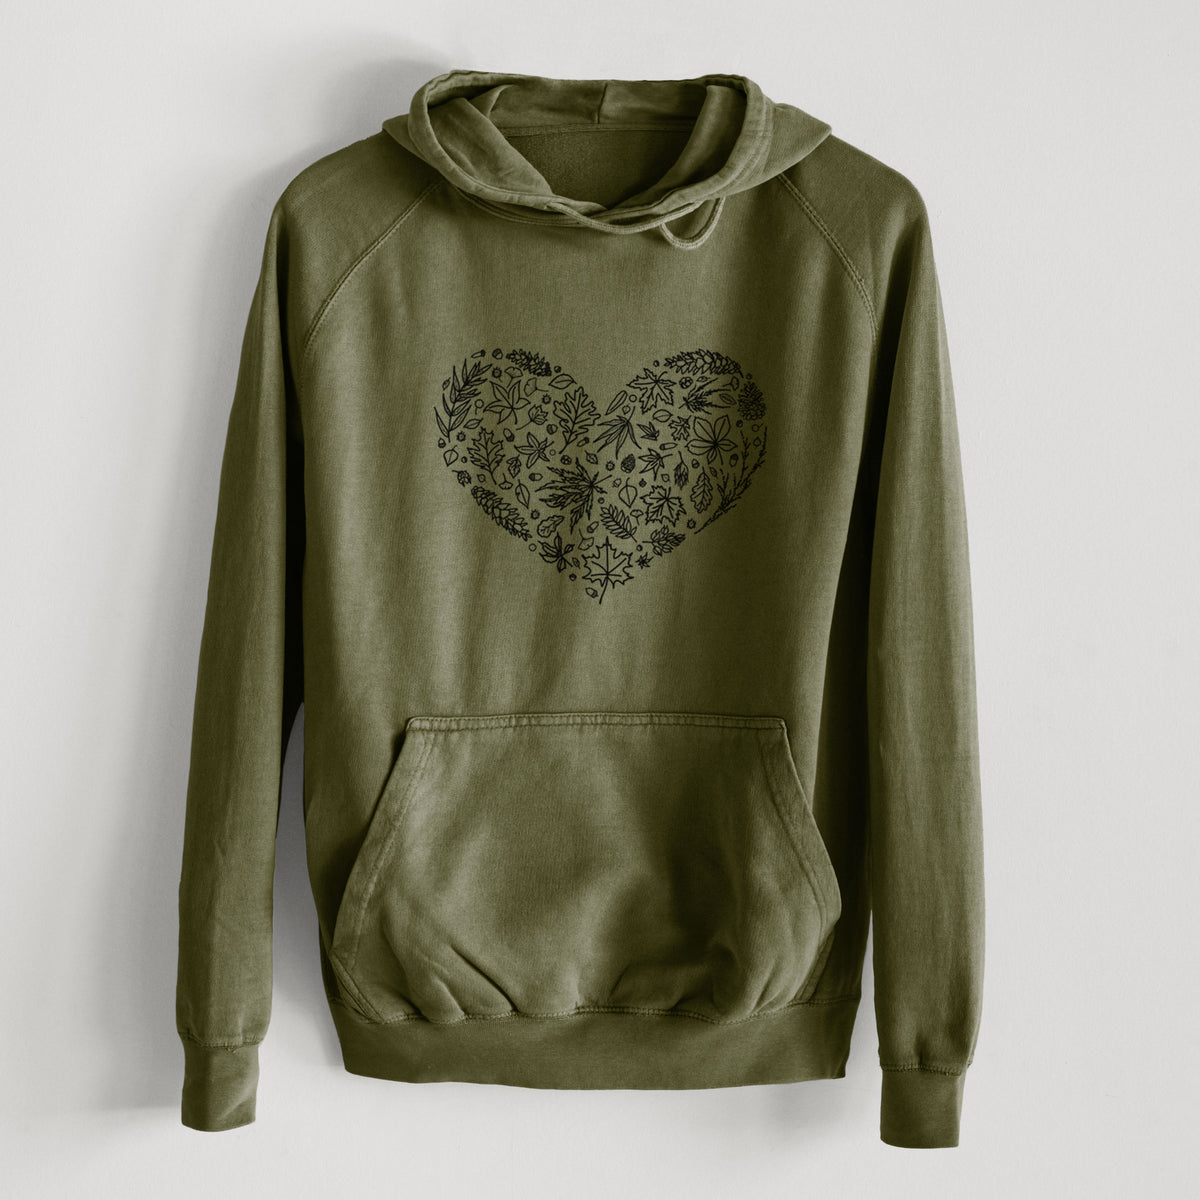 Heart Full of Autumn Leaves  - Mid-Weight Unisex Vintage 100% Cotton Hoodie